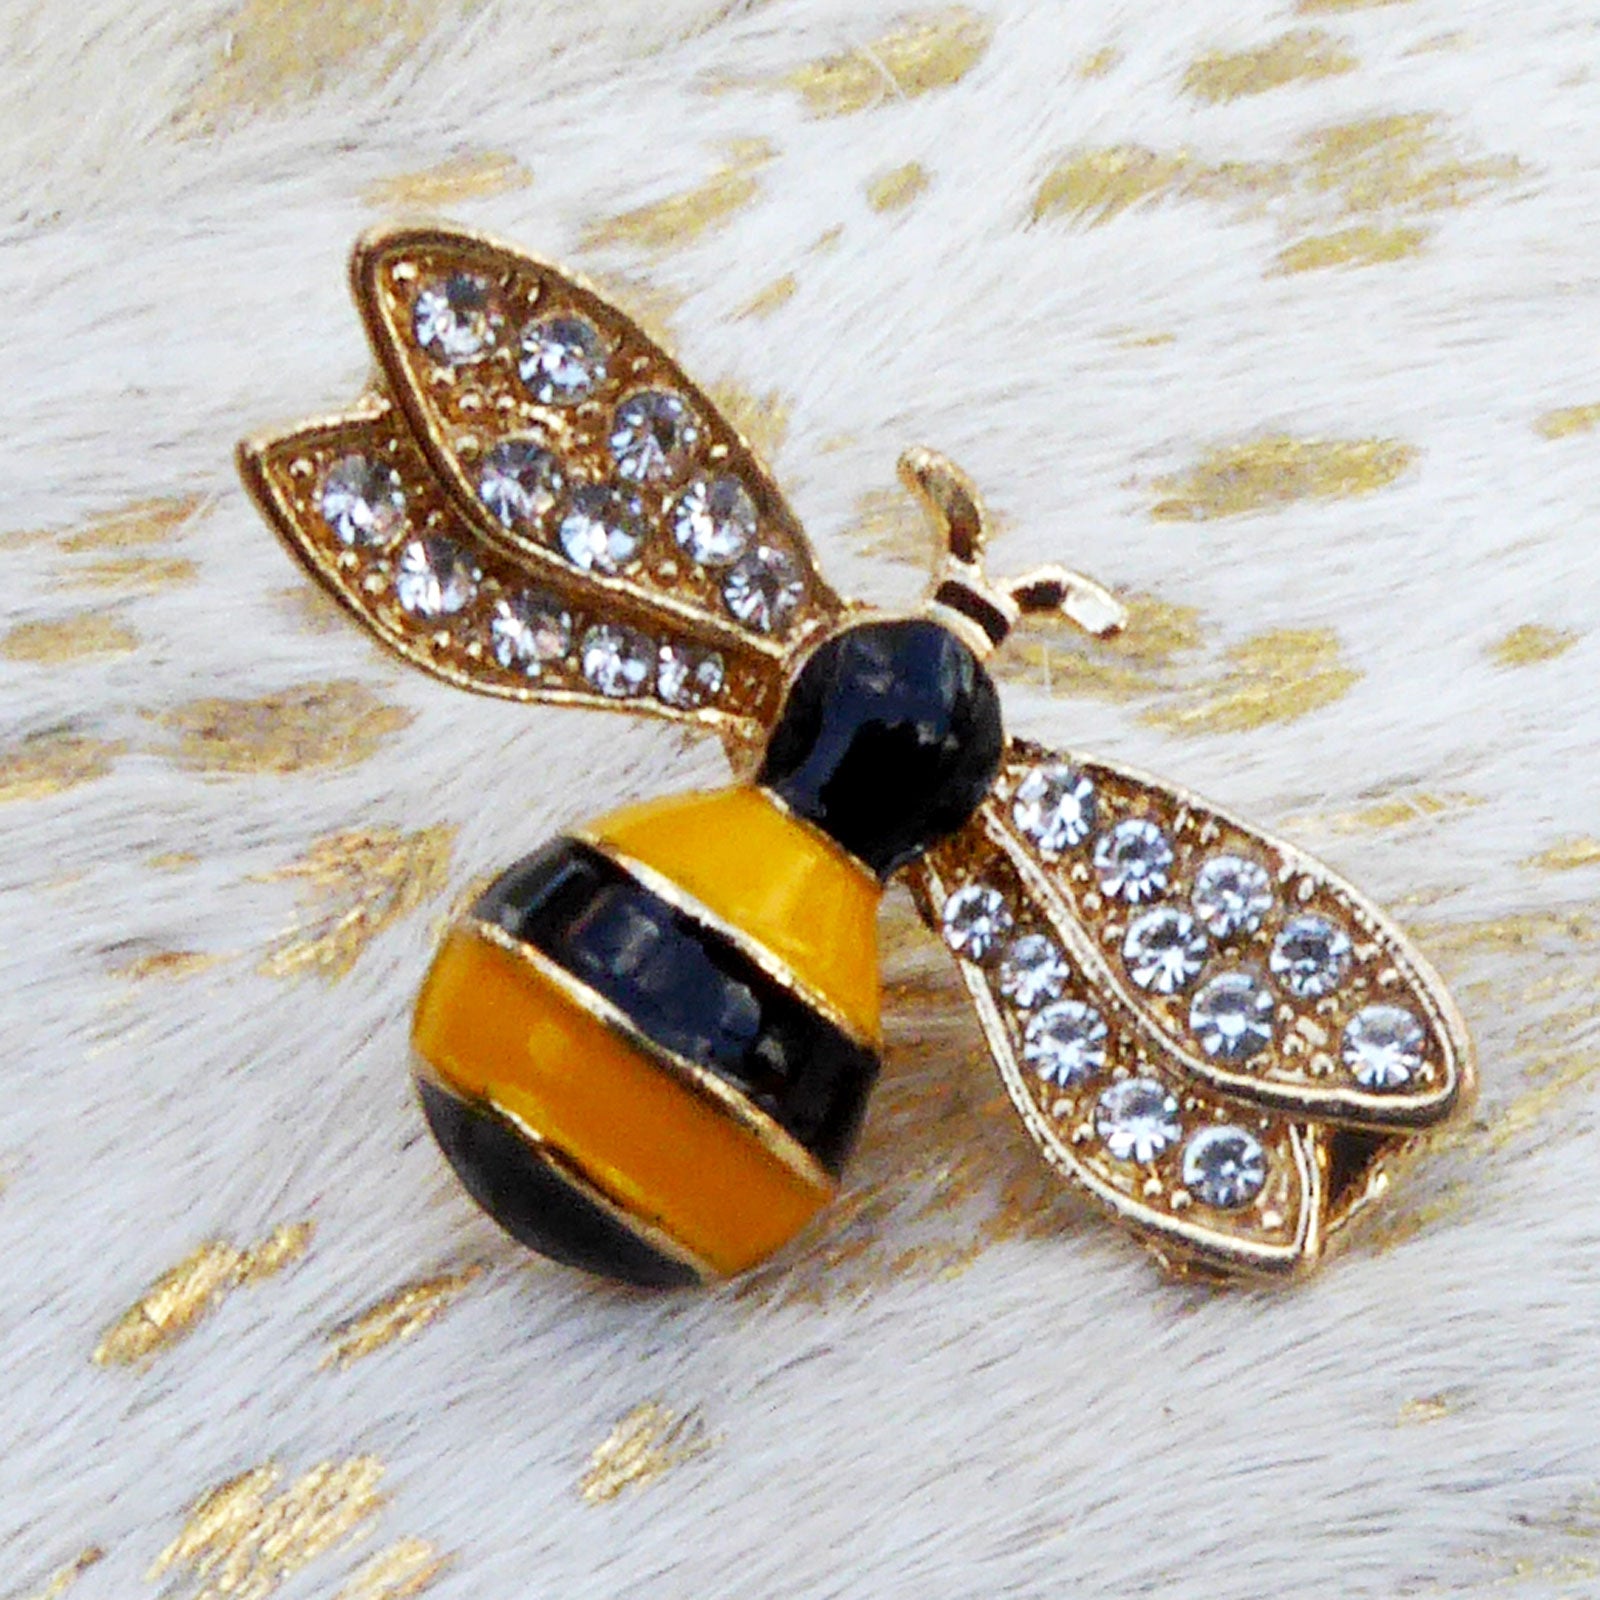 Gold plated bee pin with push-on clasp fitting